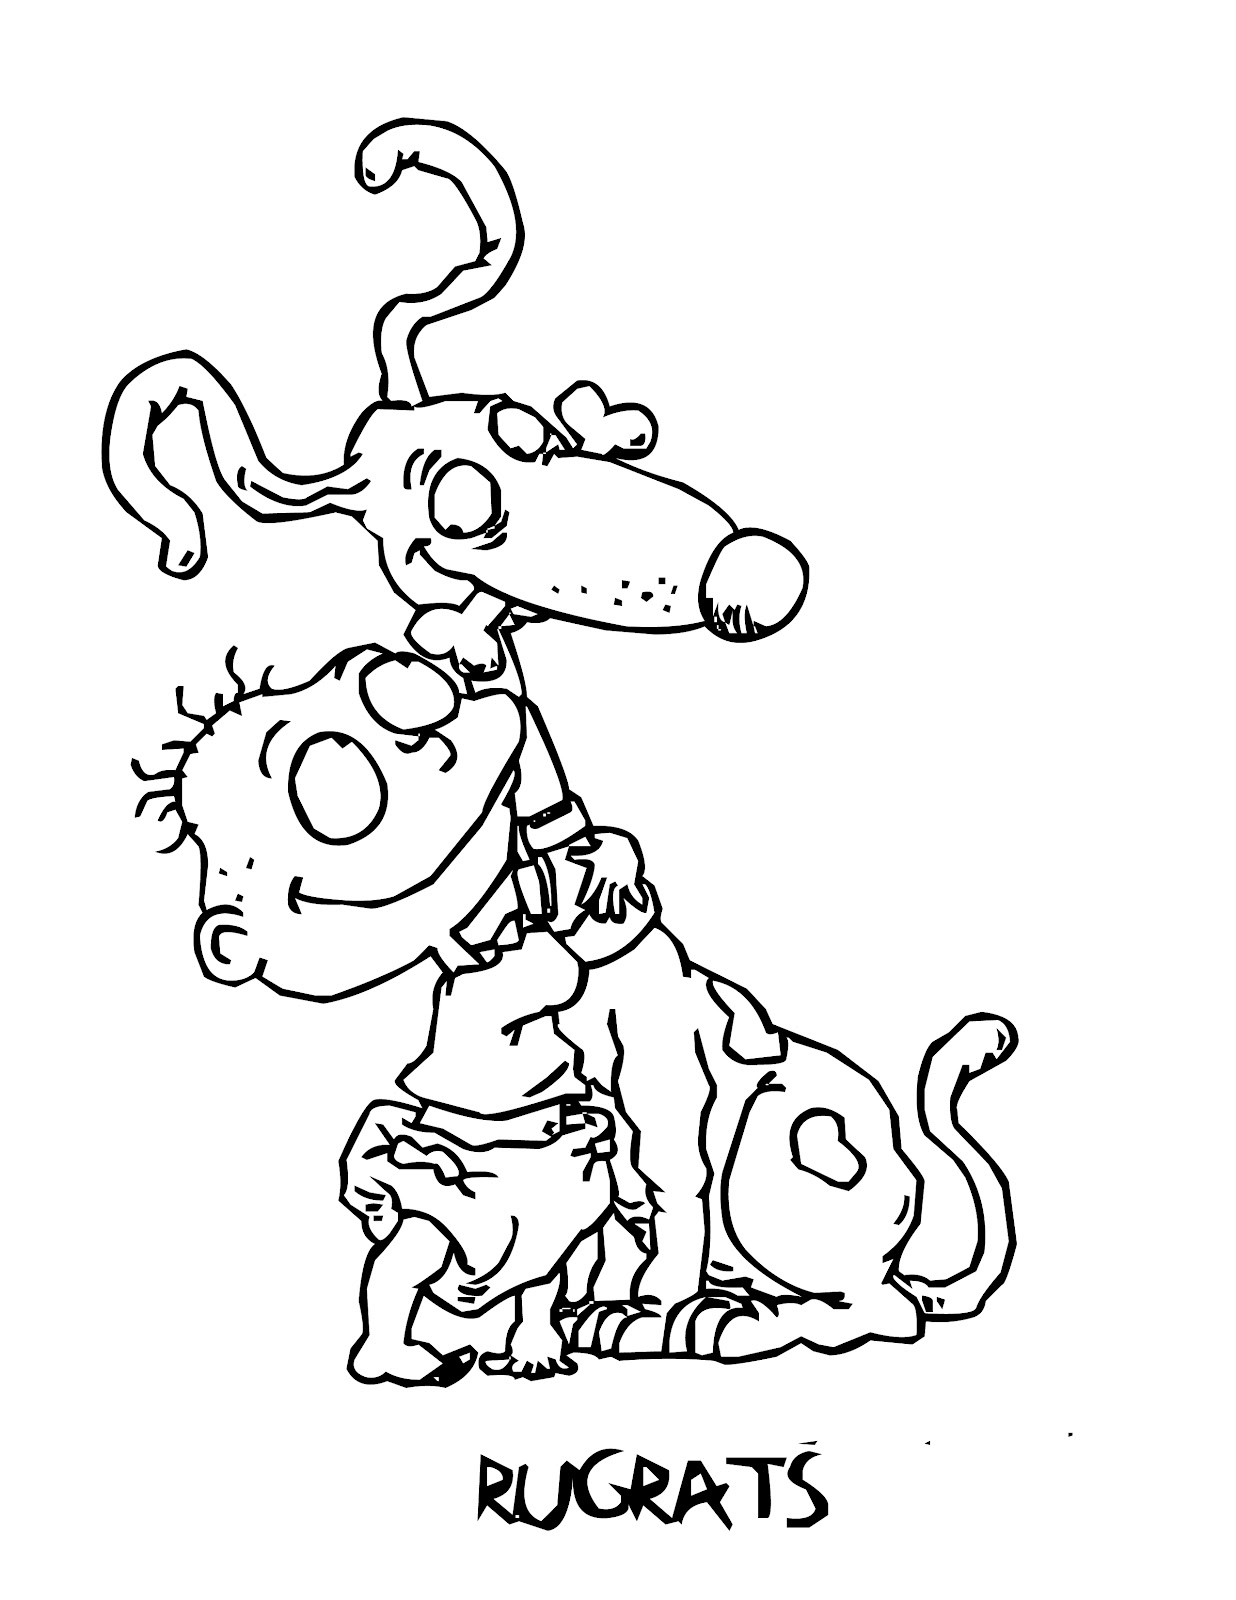 rugrats all grown up coloring pages